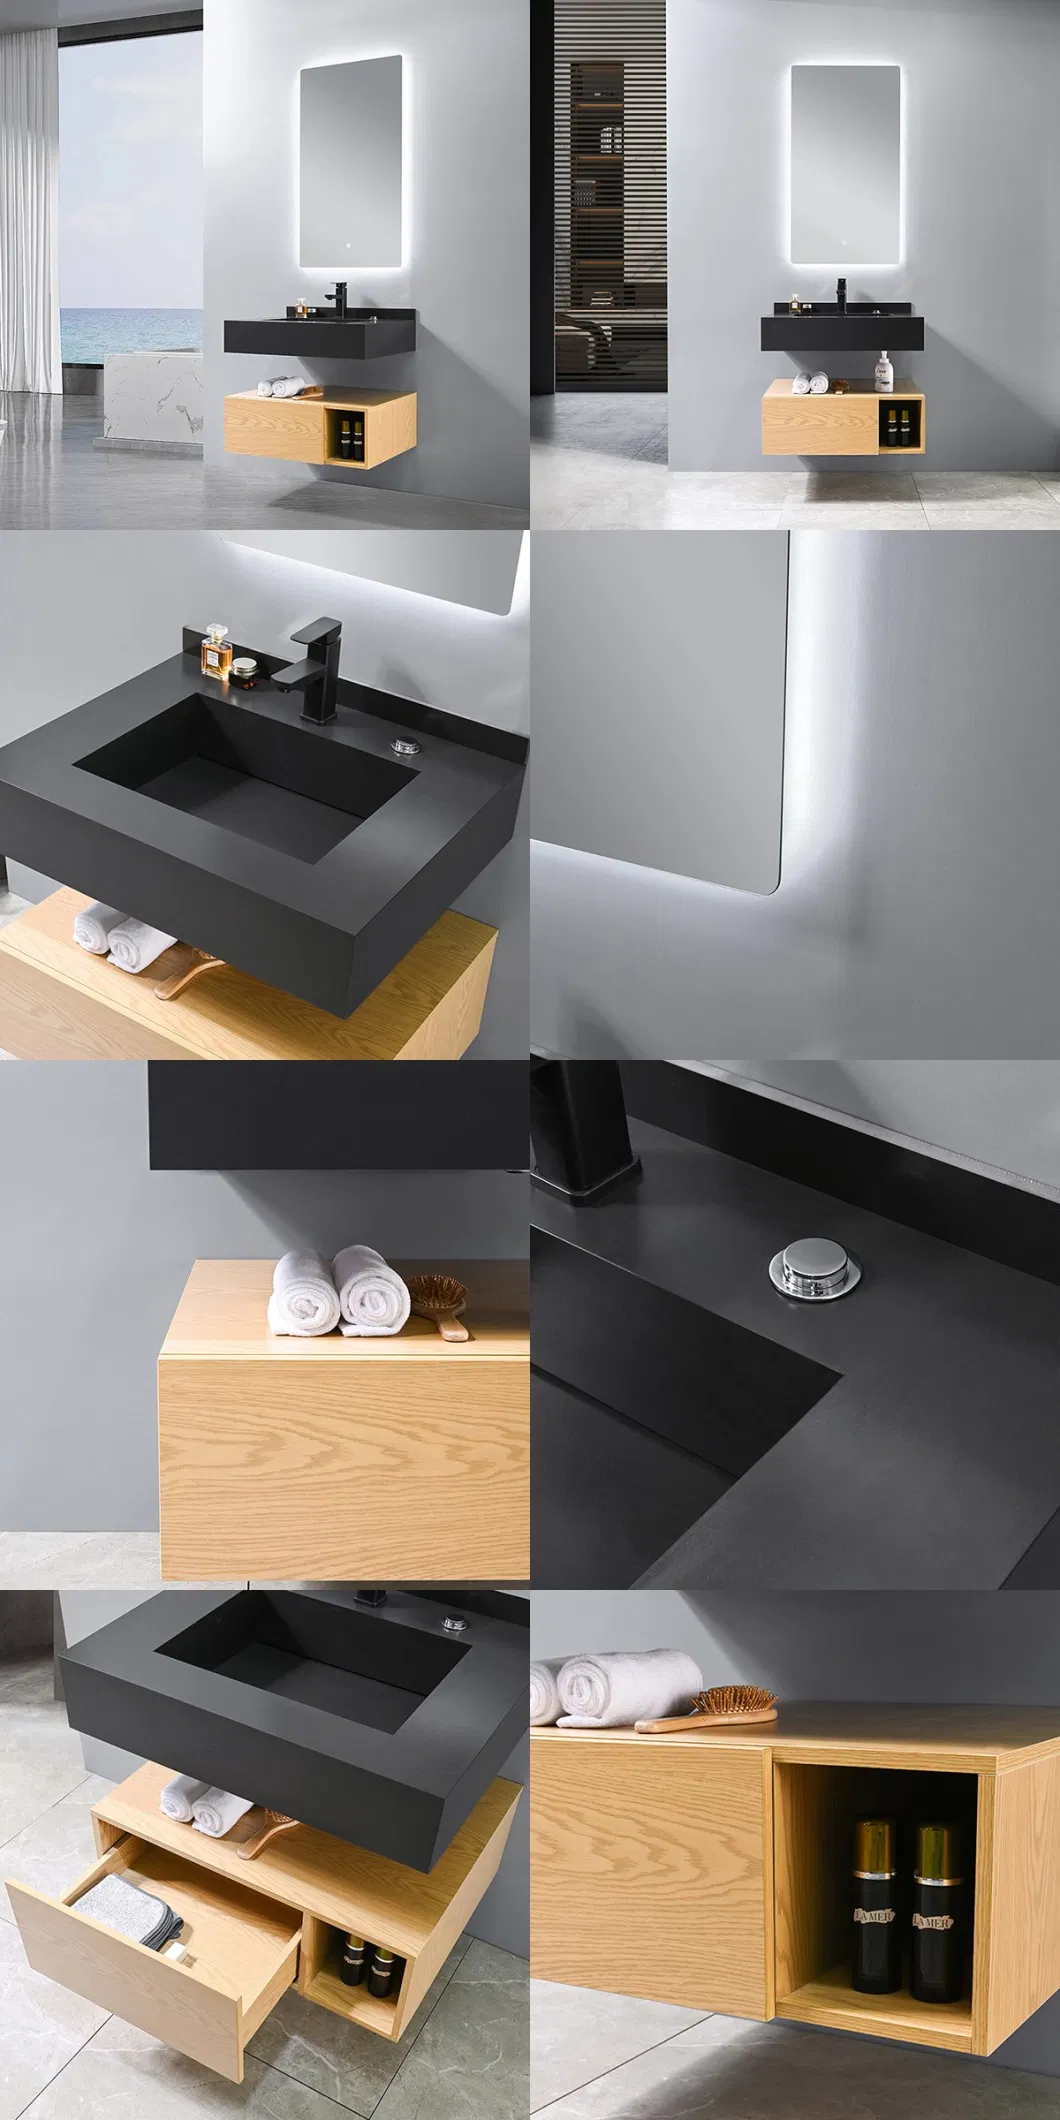 European Modern Minimalist Wooden Panel Bathroom Vanity Wall Cabinets Furniture with Drawer and Mirror